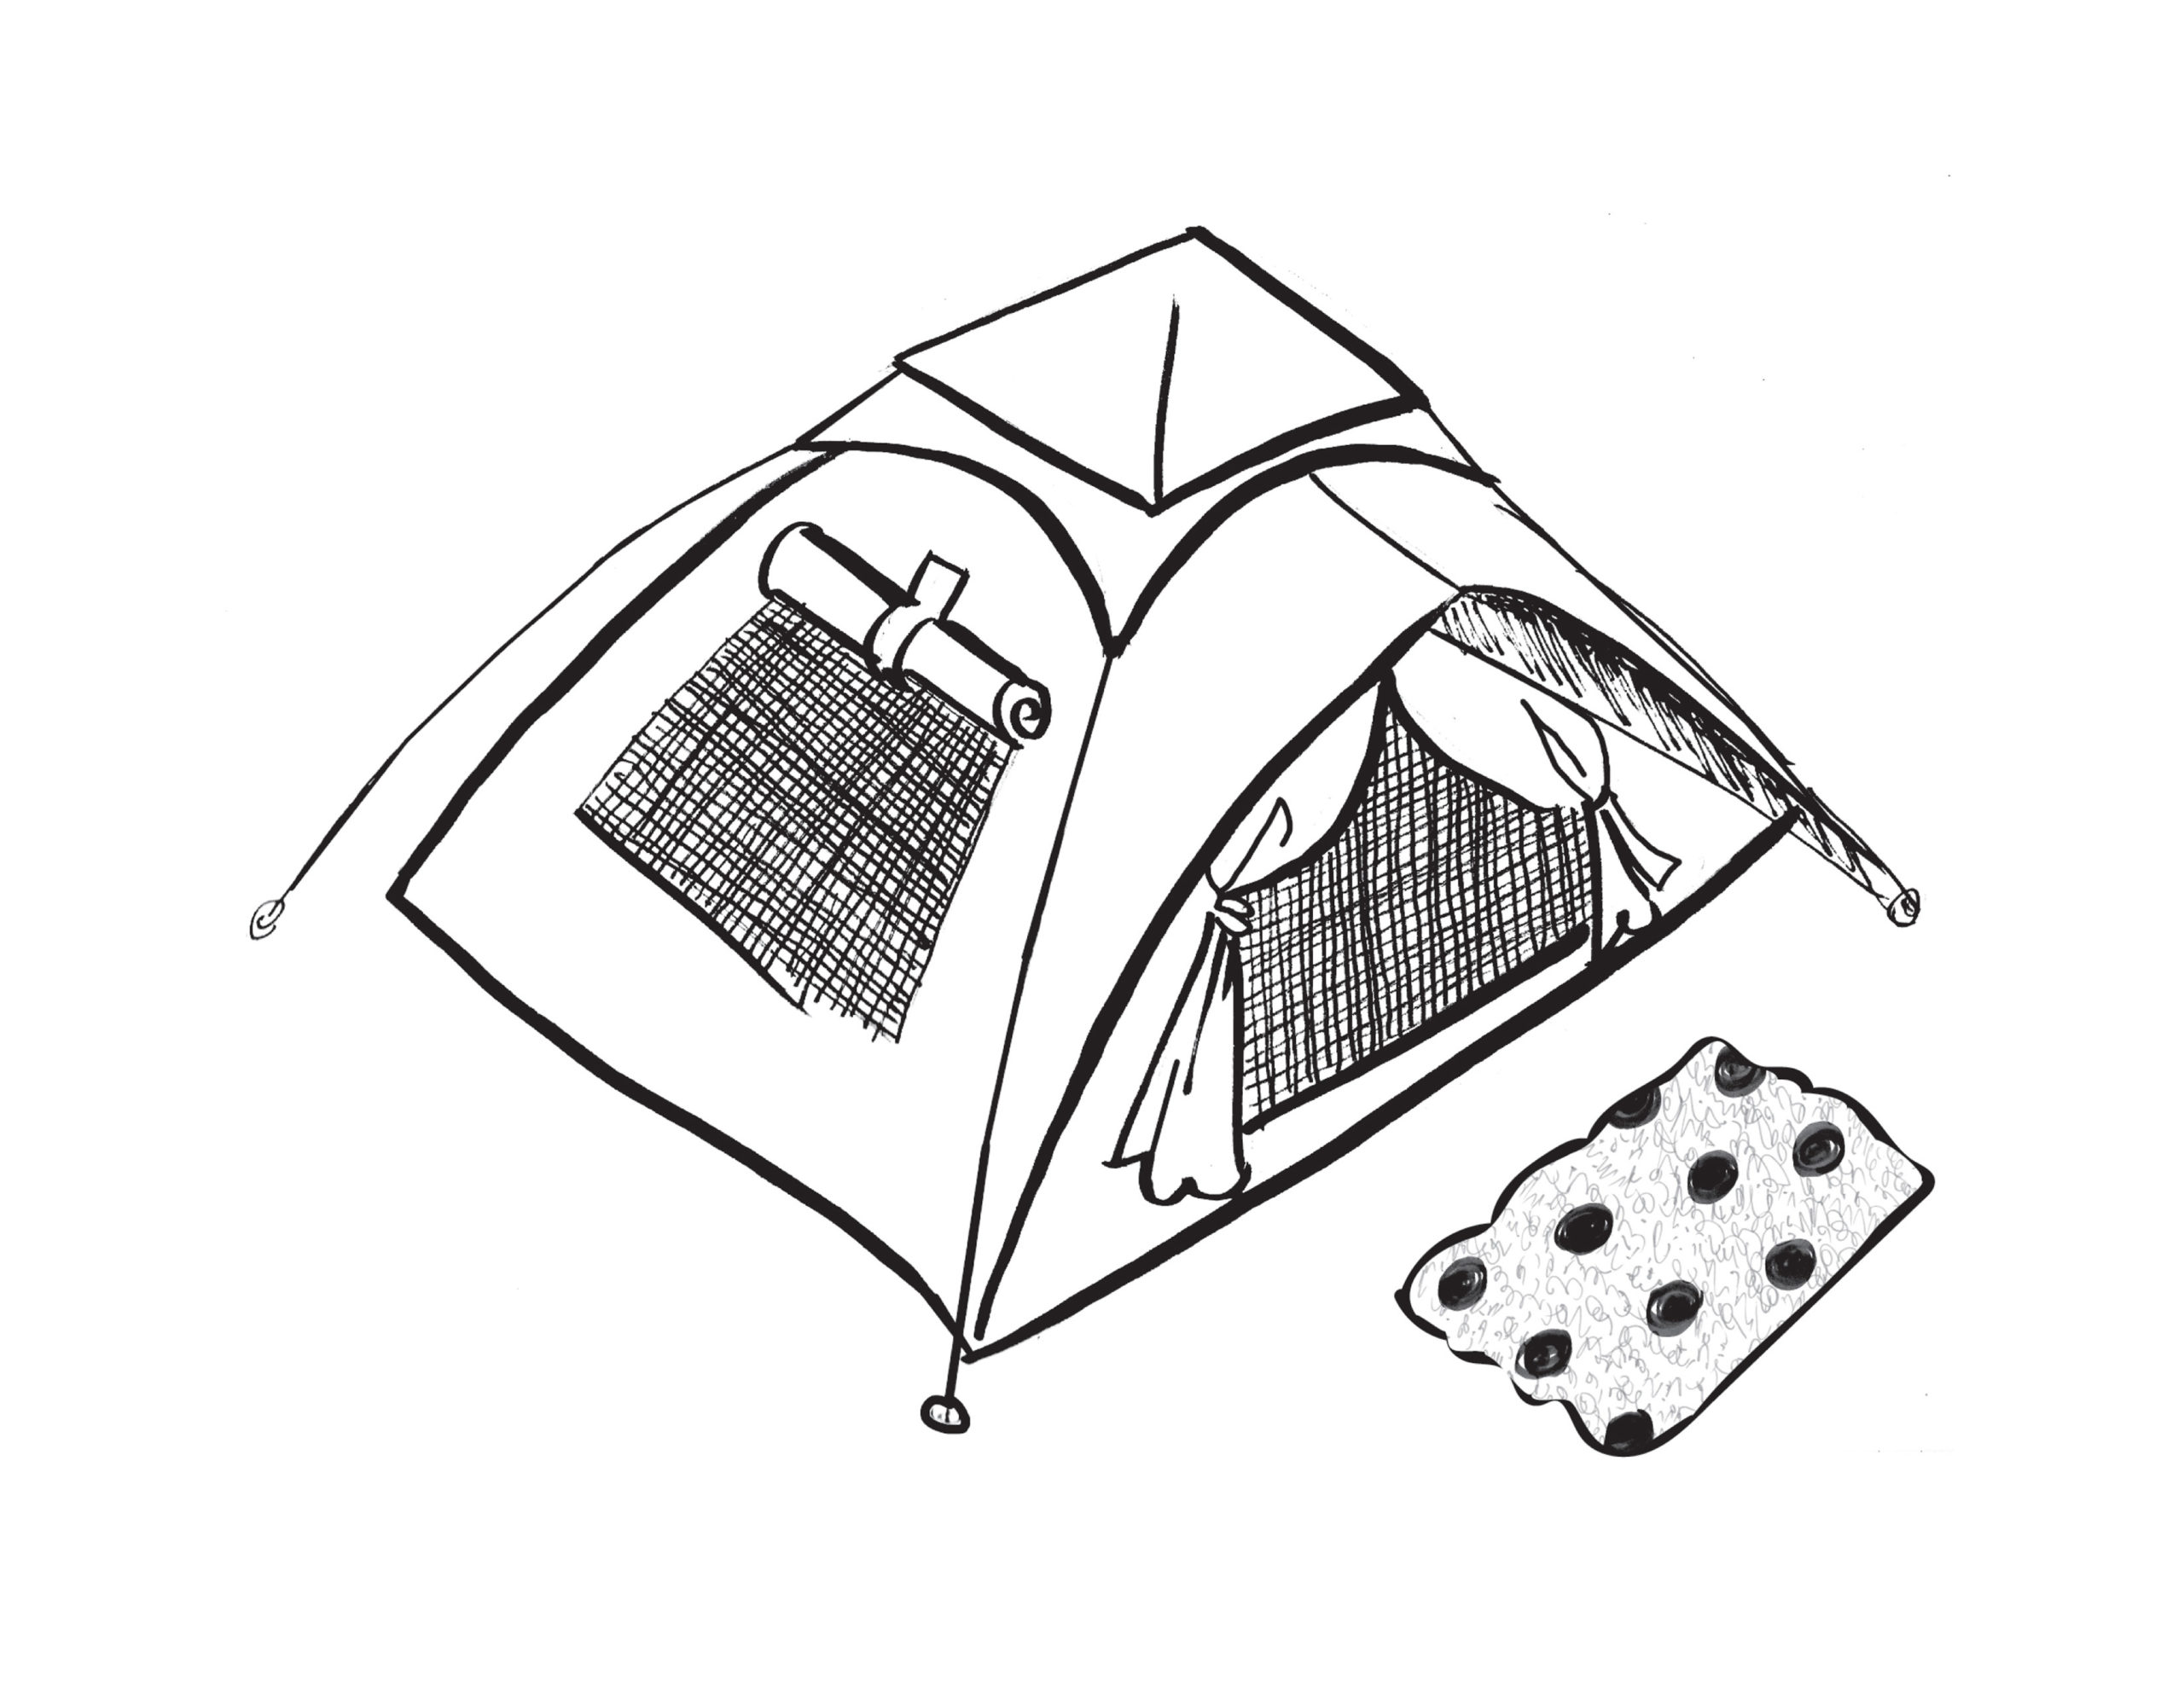 Illustration of a tent